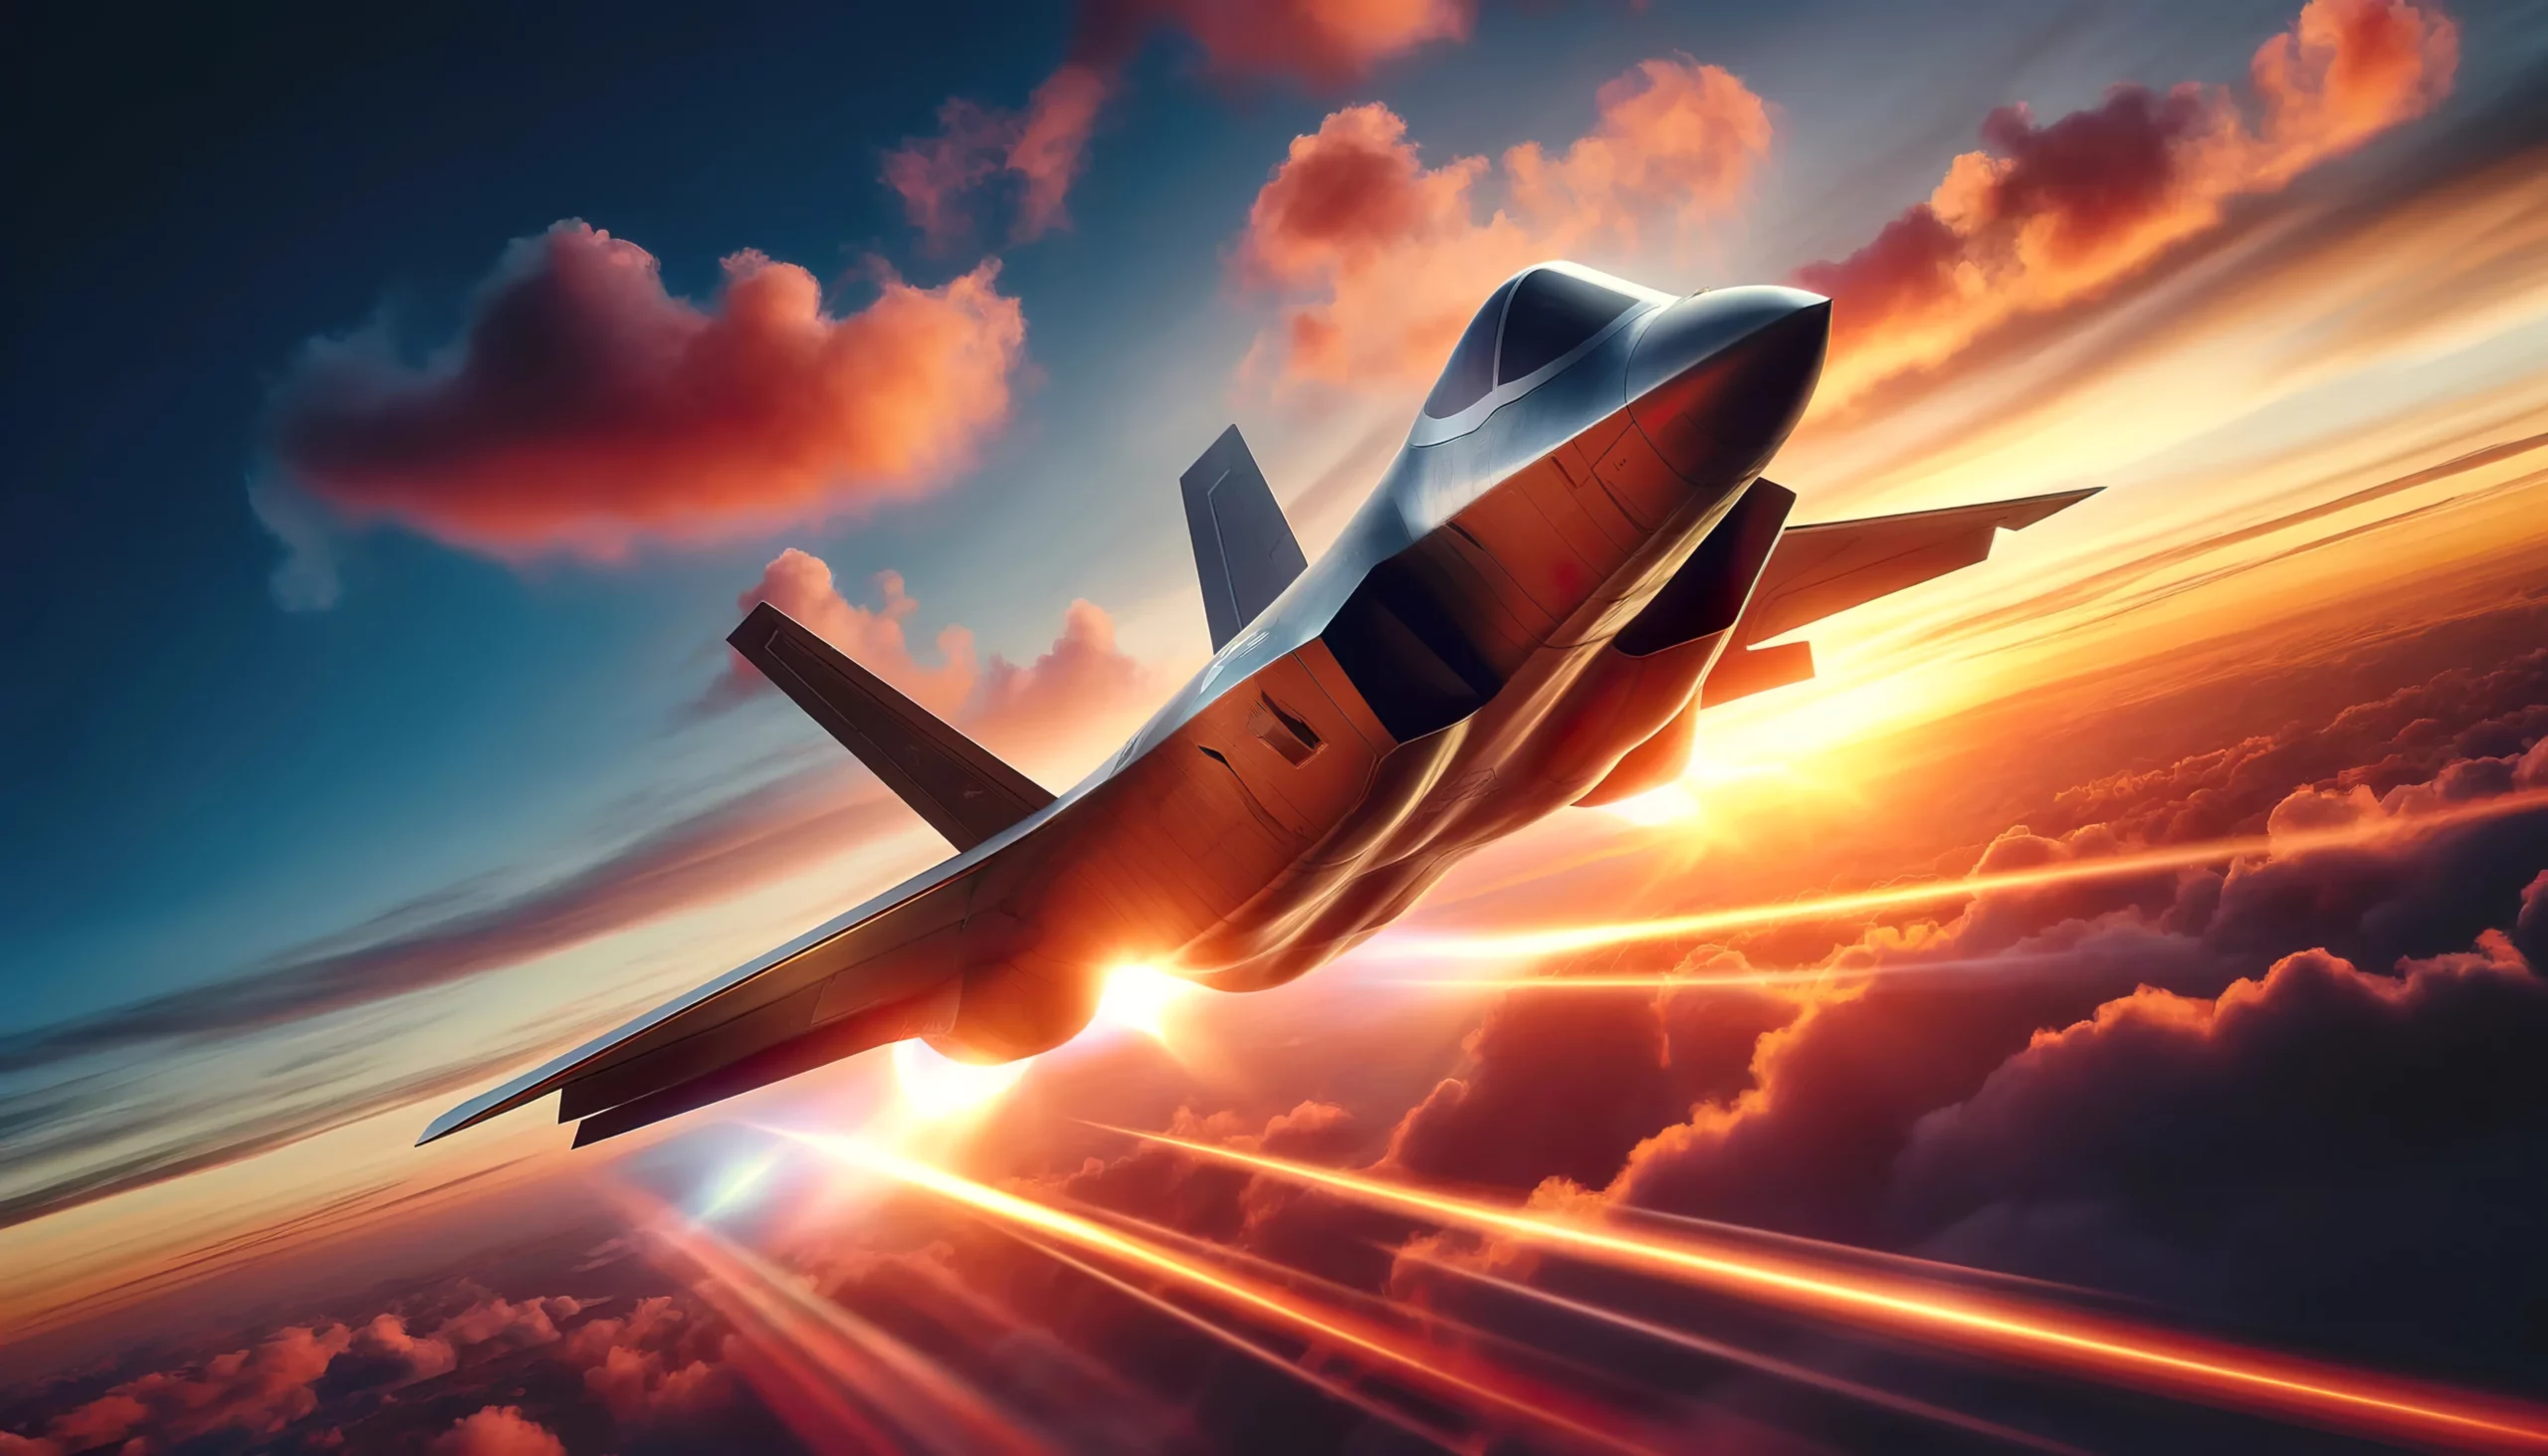 Create a hyperrealistic 16:9 image of a modern sixth-generation fighter from the NGAD program. The fighter should be in the shape of a flying wing, without a tail, and be flying in a sunset sky while shooting flares that illuminate the sky.